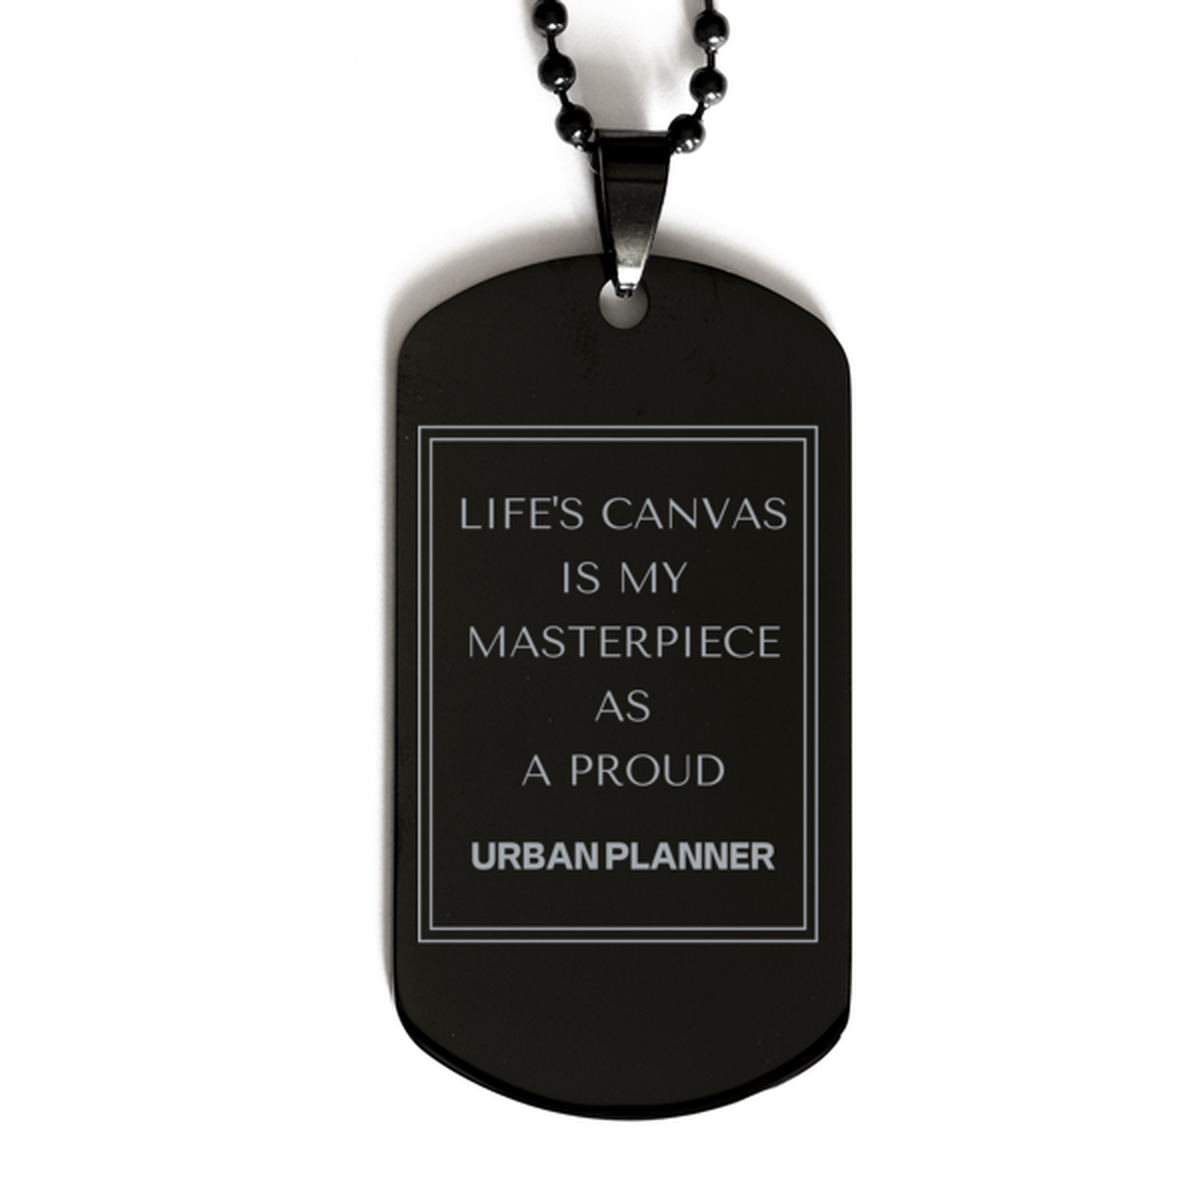 Proud Urban Planner Gifts, Life's canvas is my masterpiece, Epic Birthday Christmas Unique Black Dog Tag For Urban Planner, Coworkers, Men, Women, Friends